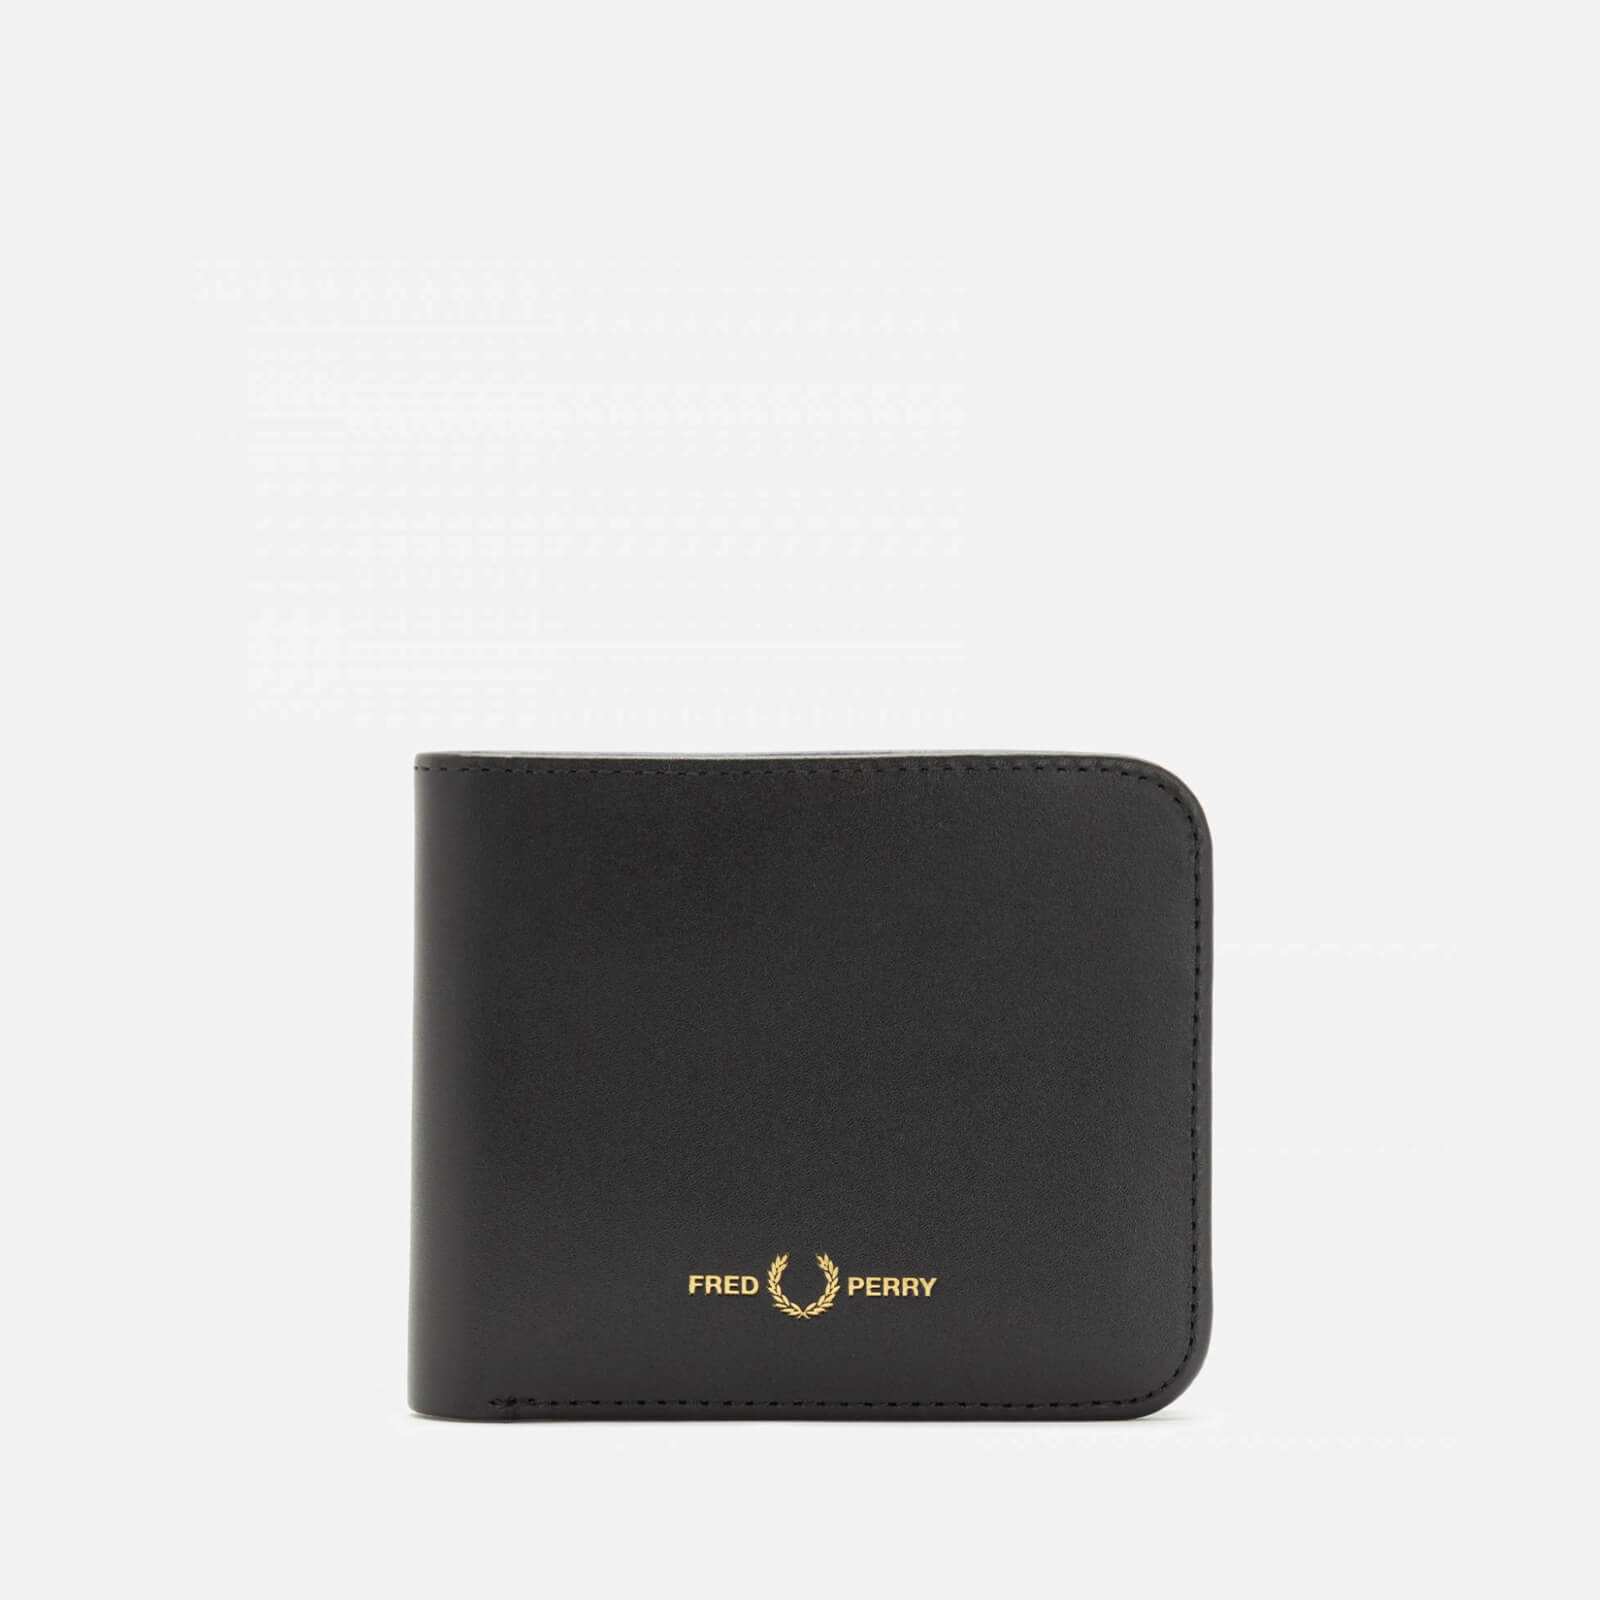 Fred Perry Men's Burnished Leather Wallet - Black